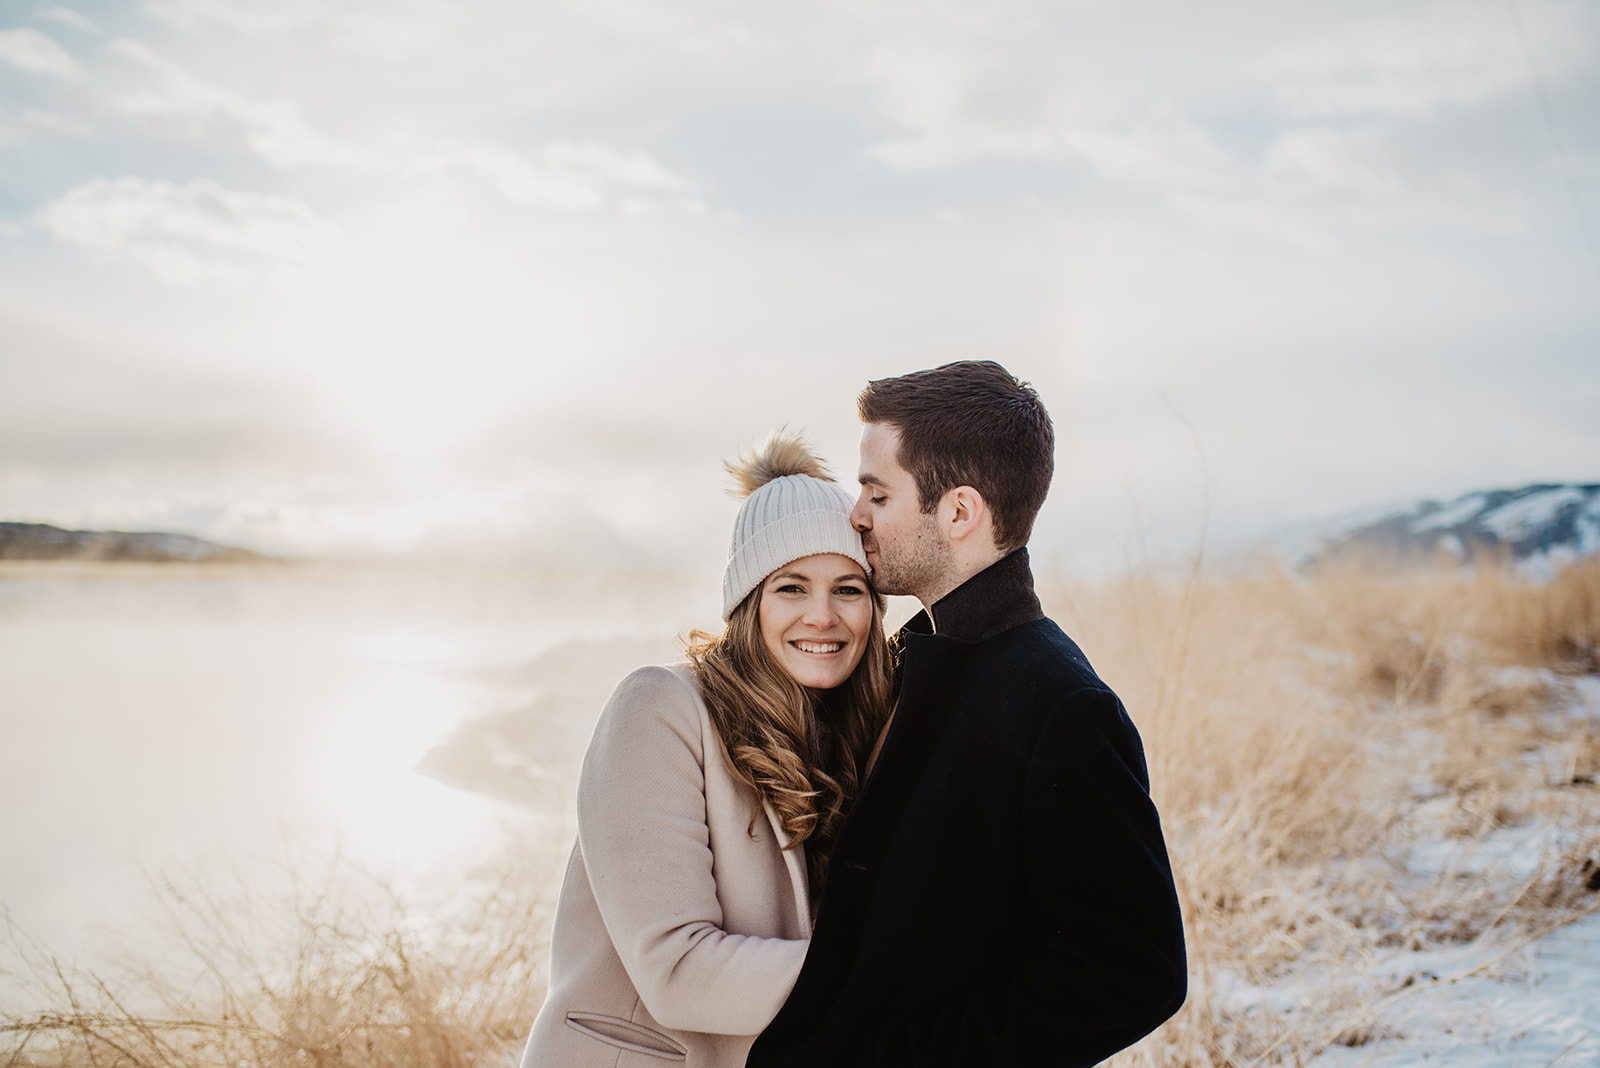 Jackson Hole Winter Engagement Session in front of a lake in Jackson Hole as teh sun set and gleams behind the couple, the man is kissing the woman's forehead as she looks at the camera and smiles